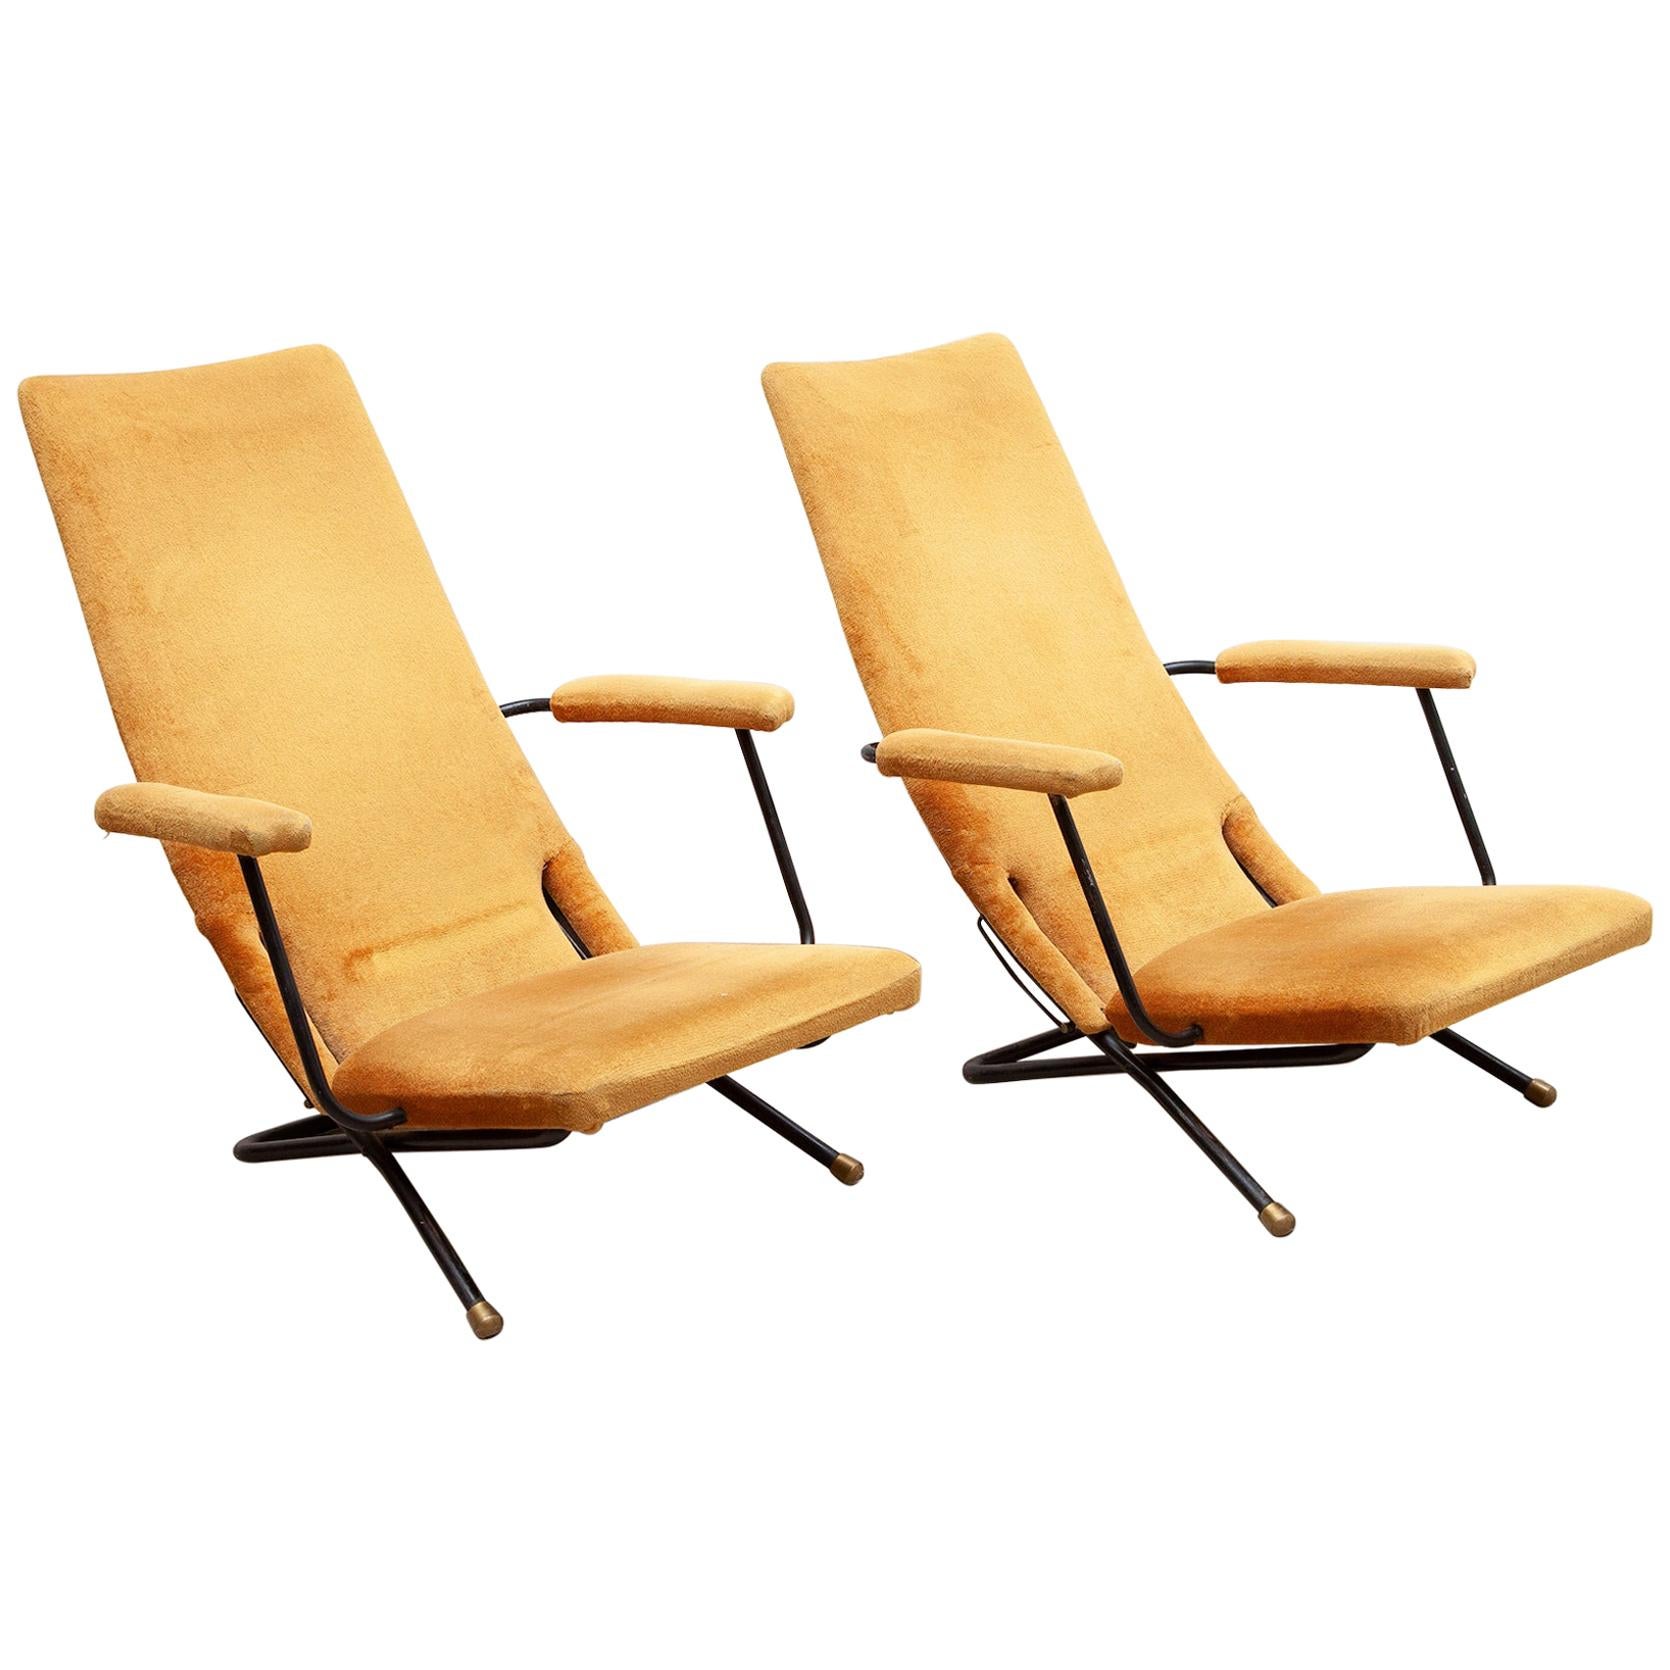 Set of Two Reclining Lounge, Easy Chairs, 1950s Germany